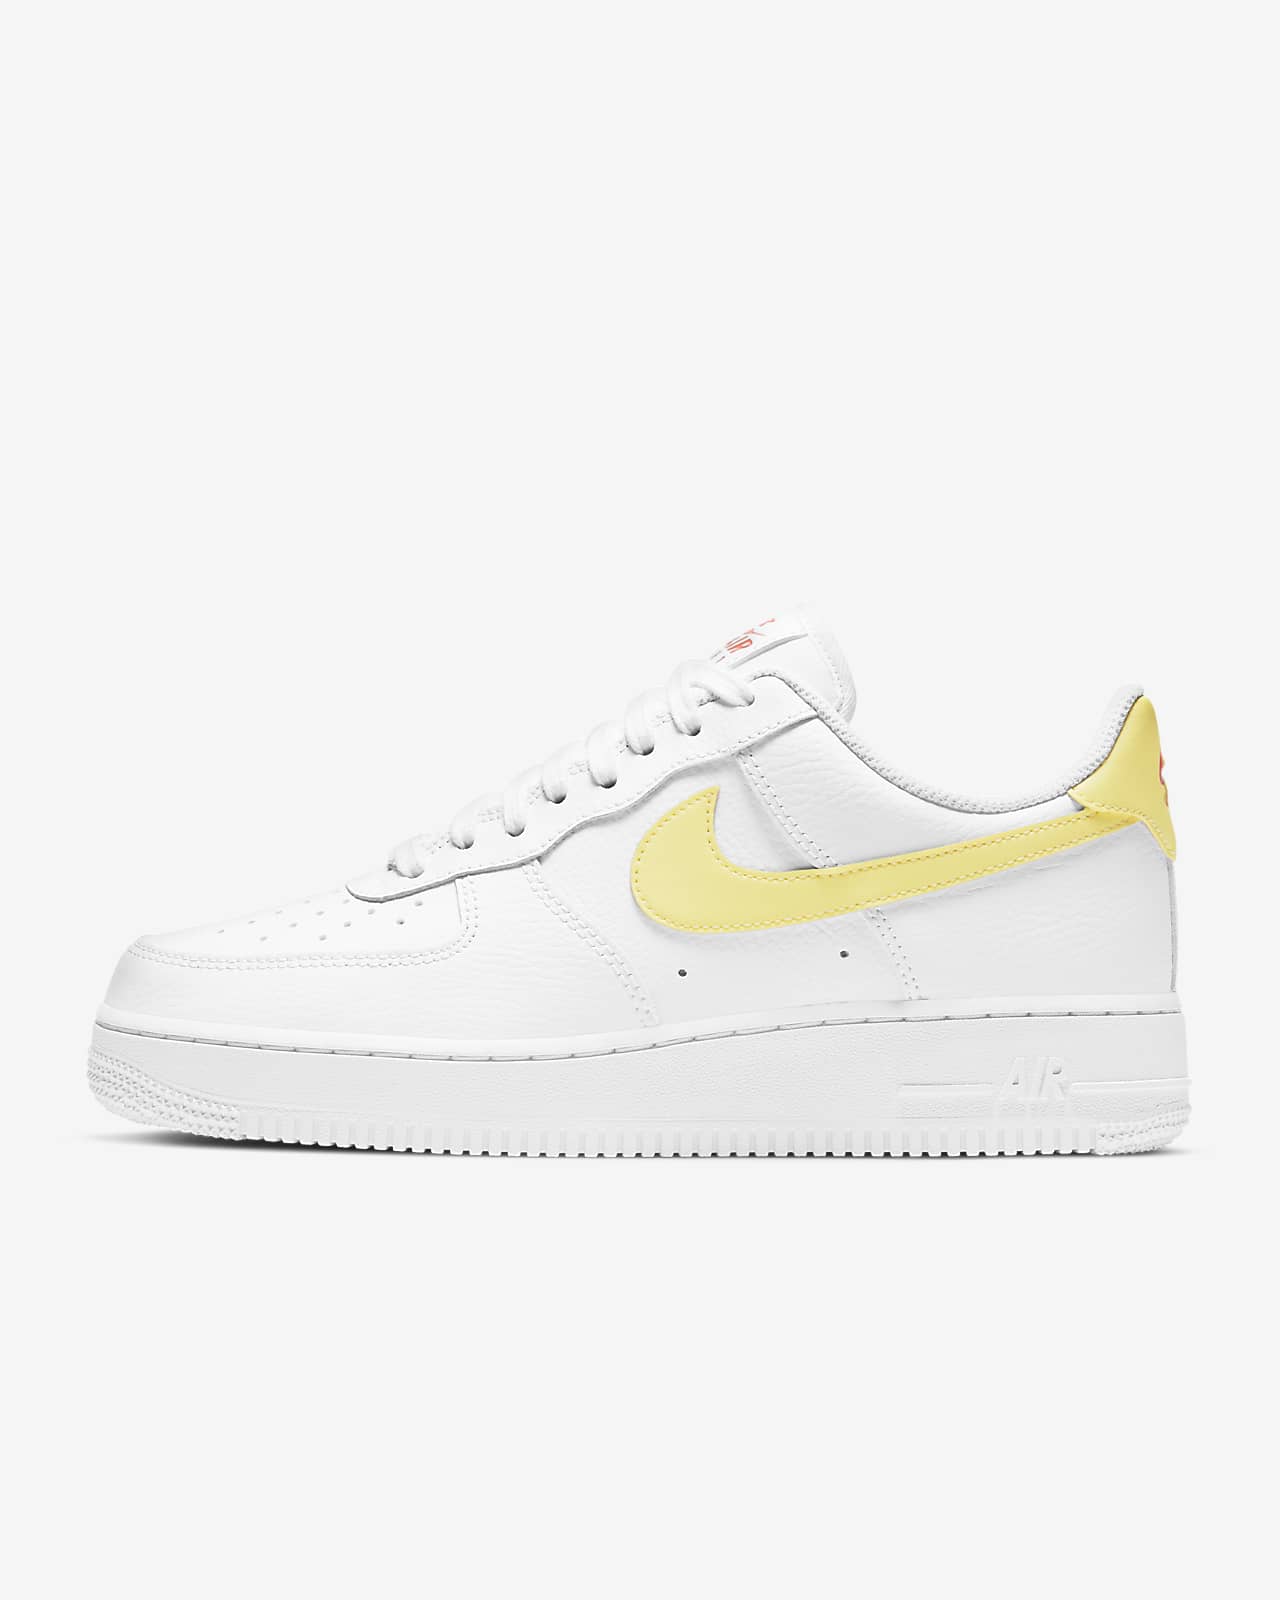 womens air force 1 size 5